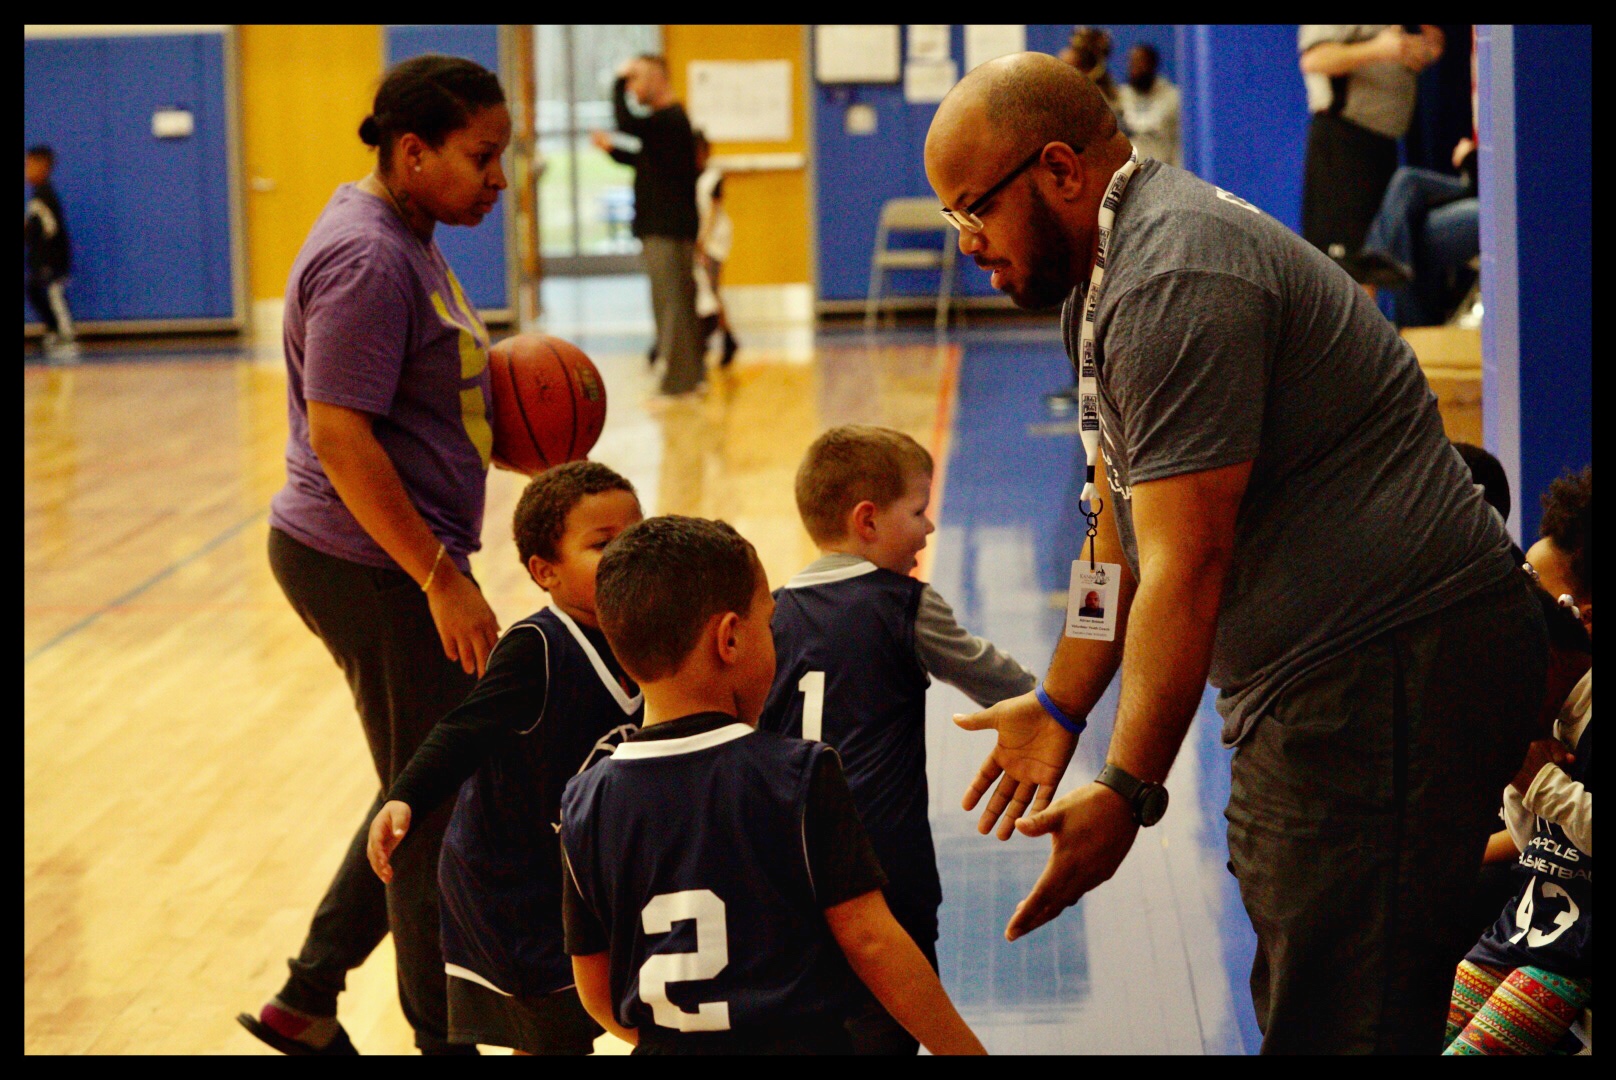 Basketball coach with players